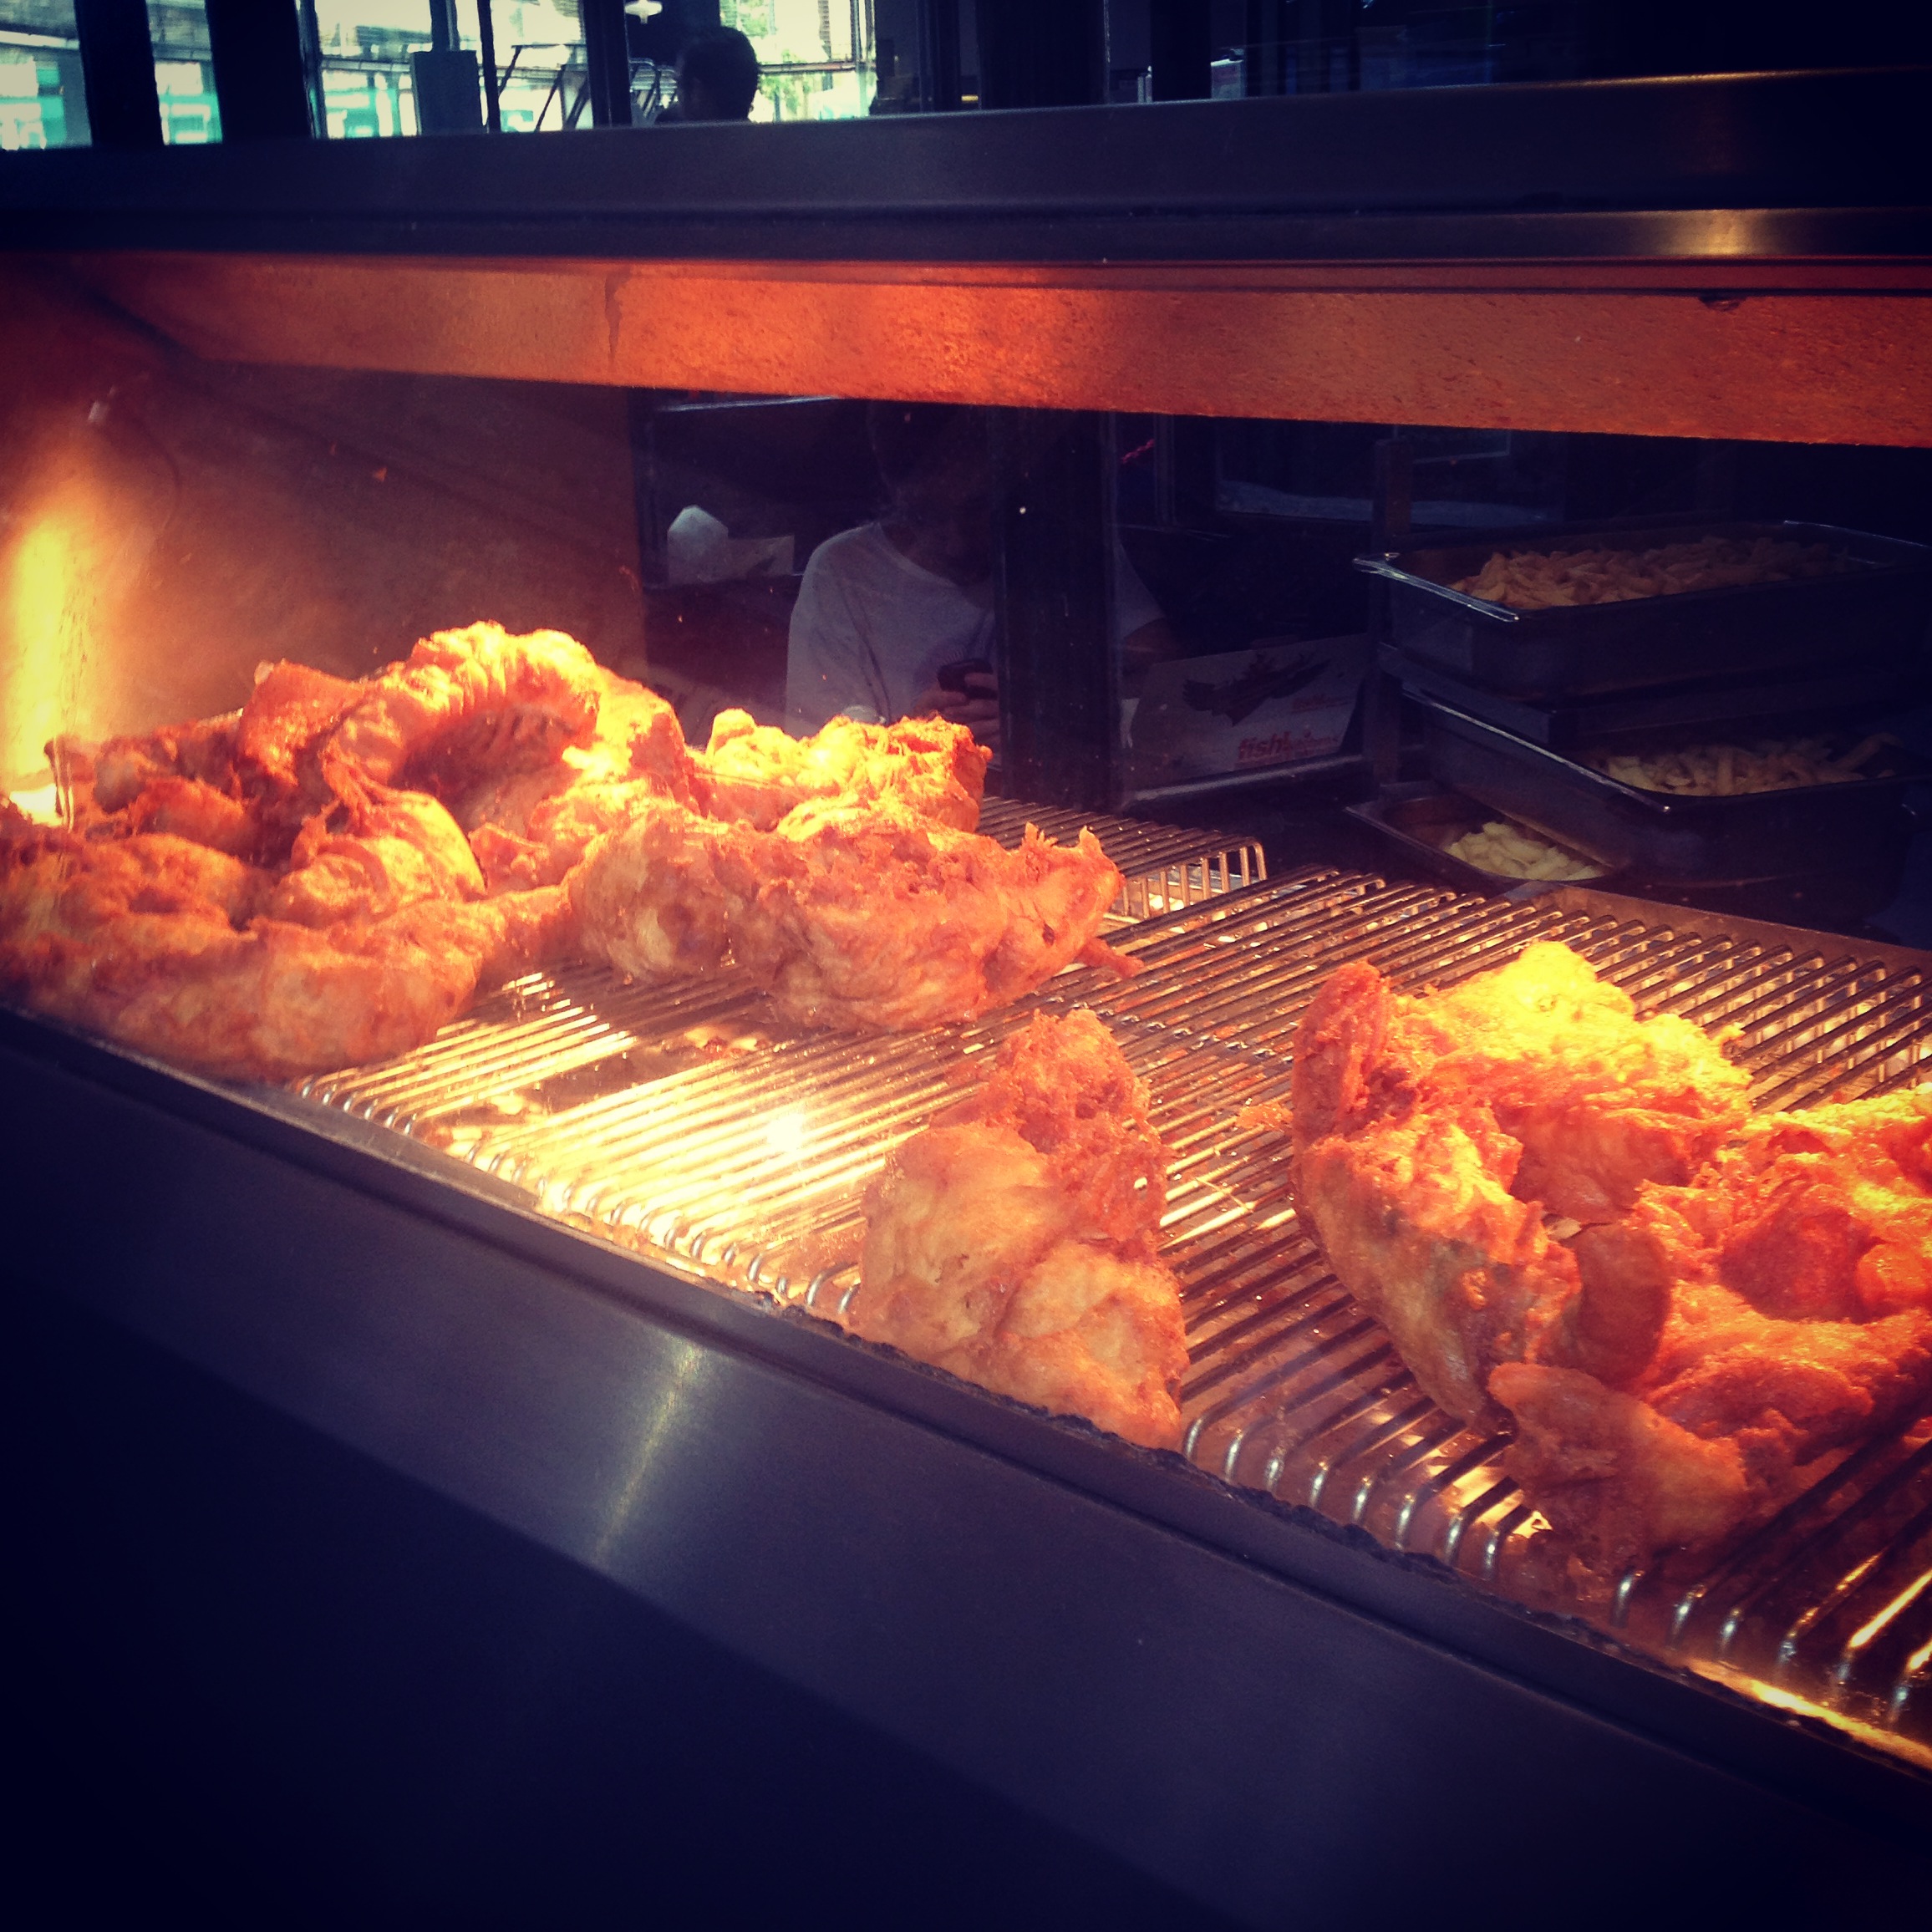 Fried lobsters... Didn't know what to think about it... - Des homards frits... Je suis restée perplexe... / Borough Market in London/ Pic by kiwikoo